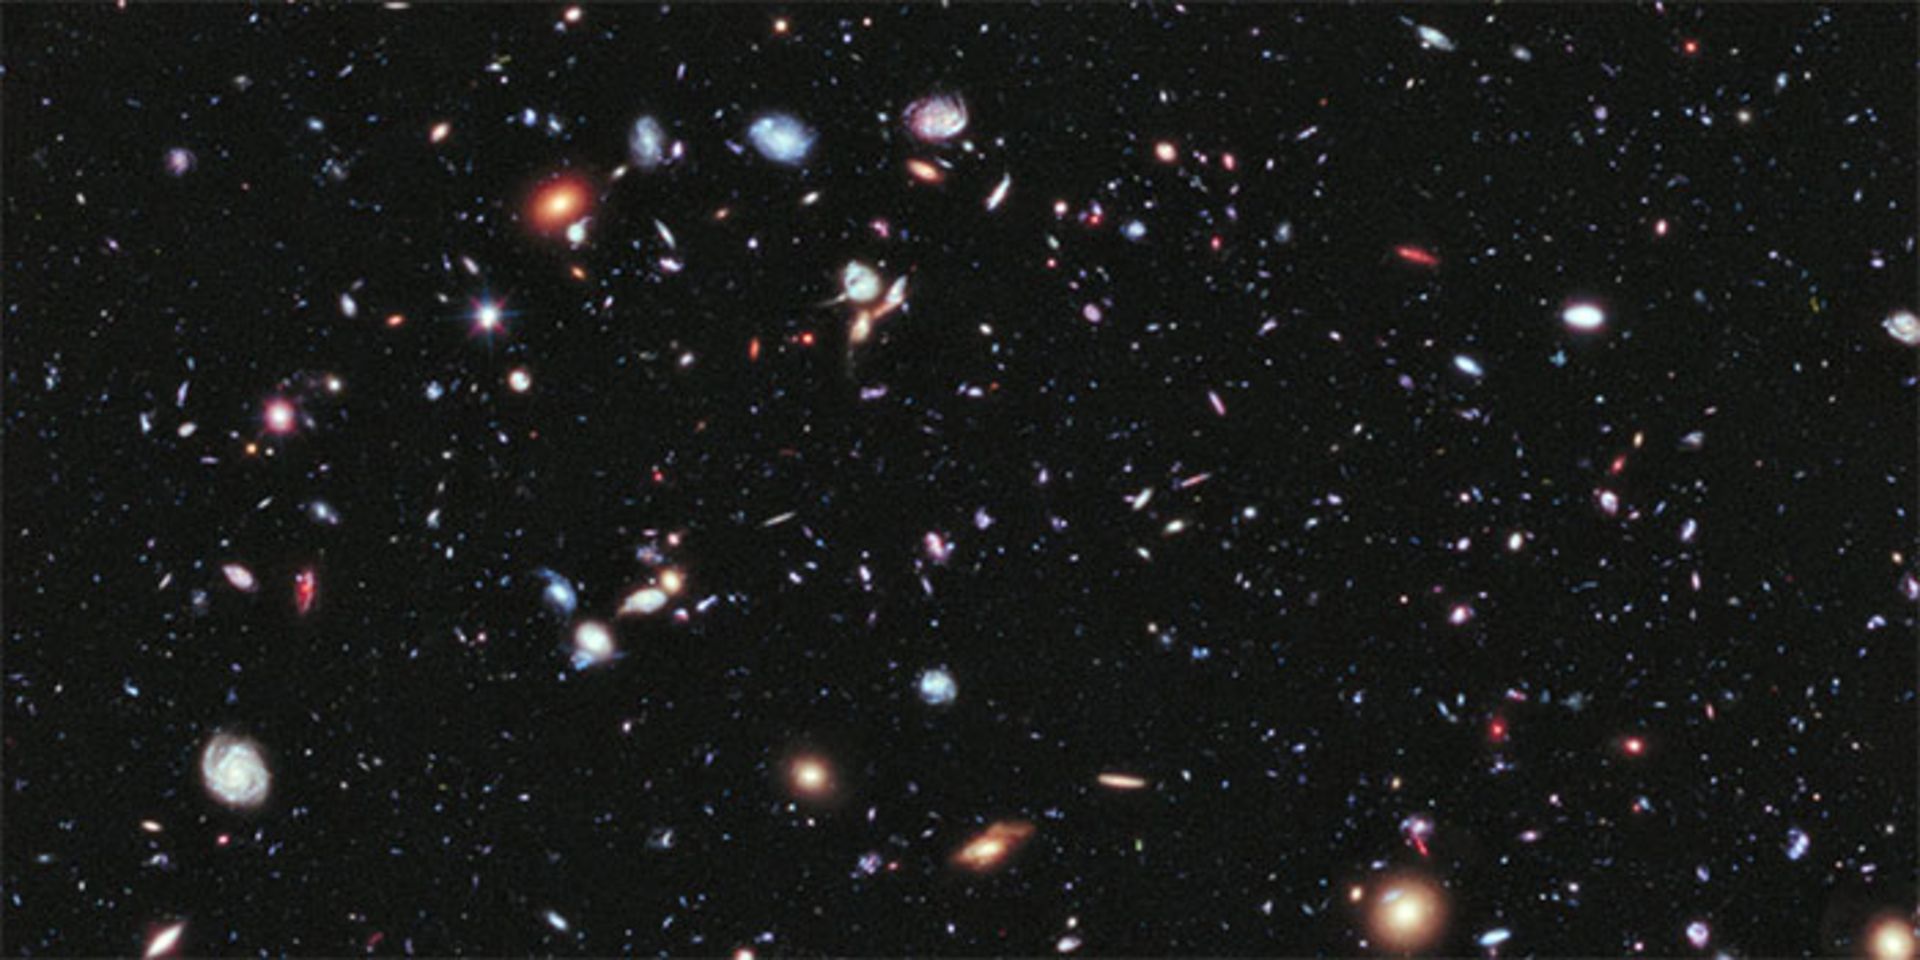 The number of galaxies